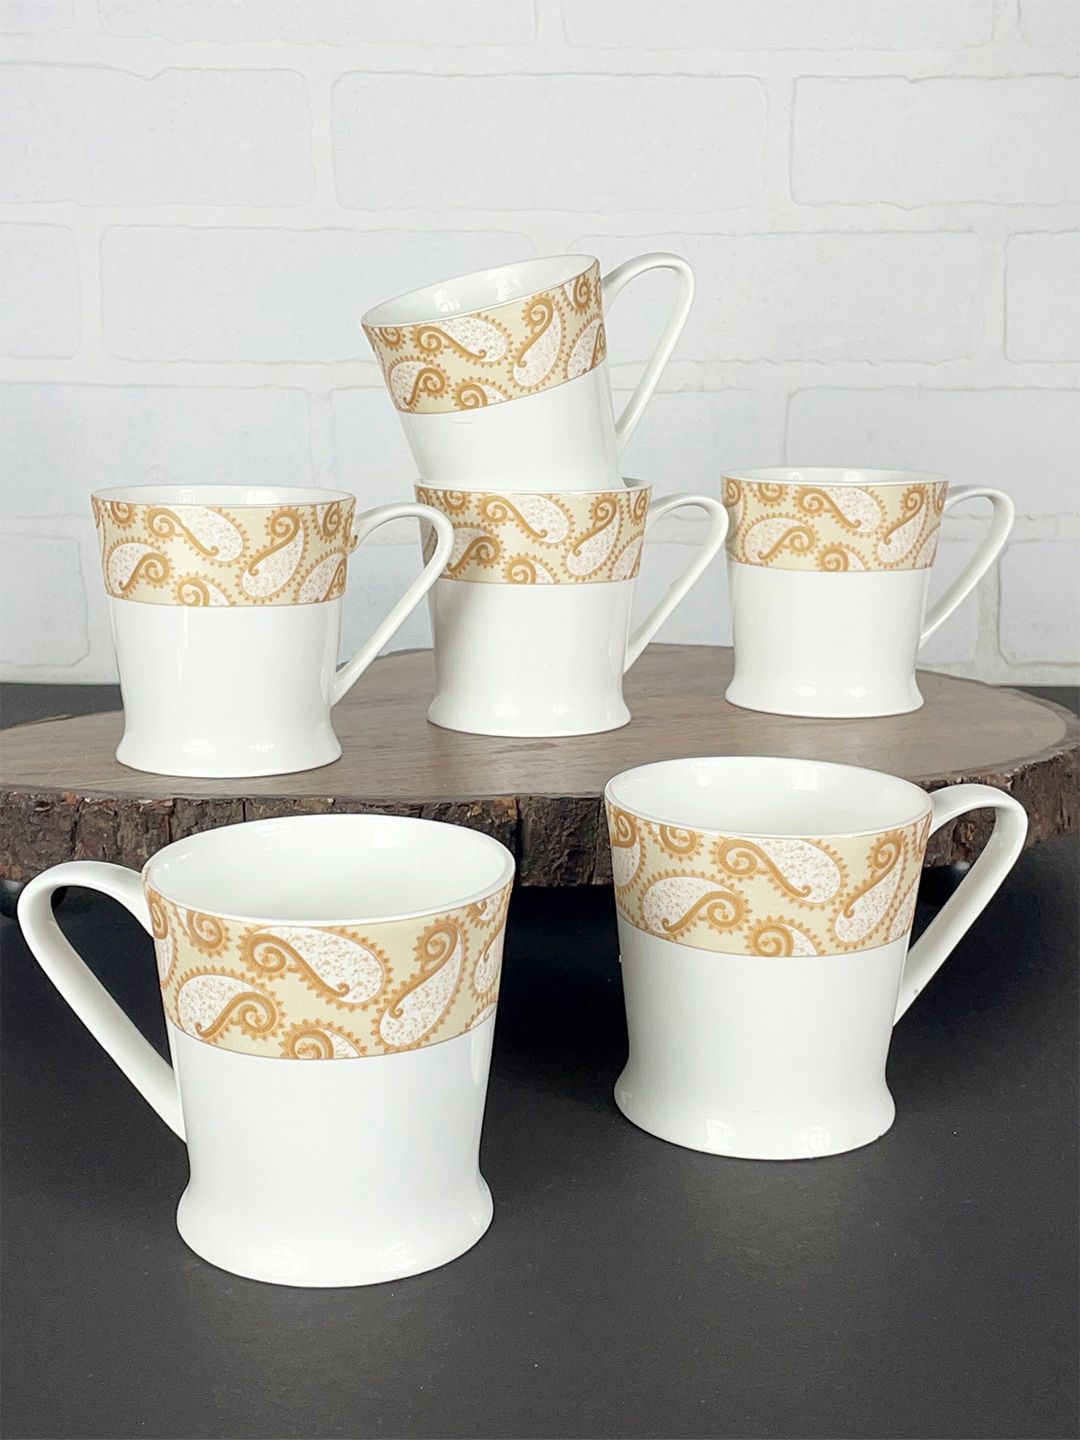 CLAY CRAFT Set Of 6 White & Brown Printed Ceramic Glossy Cups and Mugs Price in India